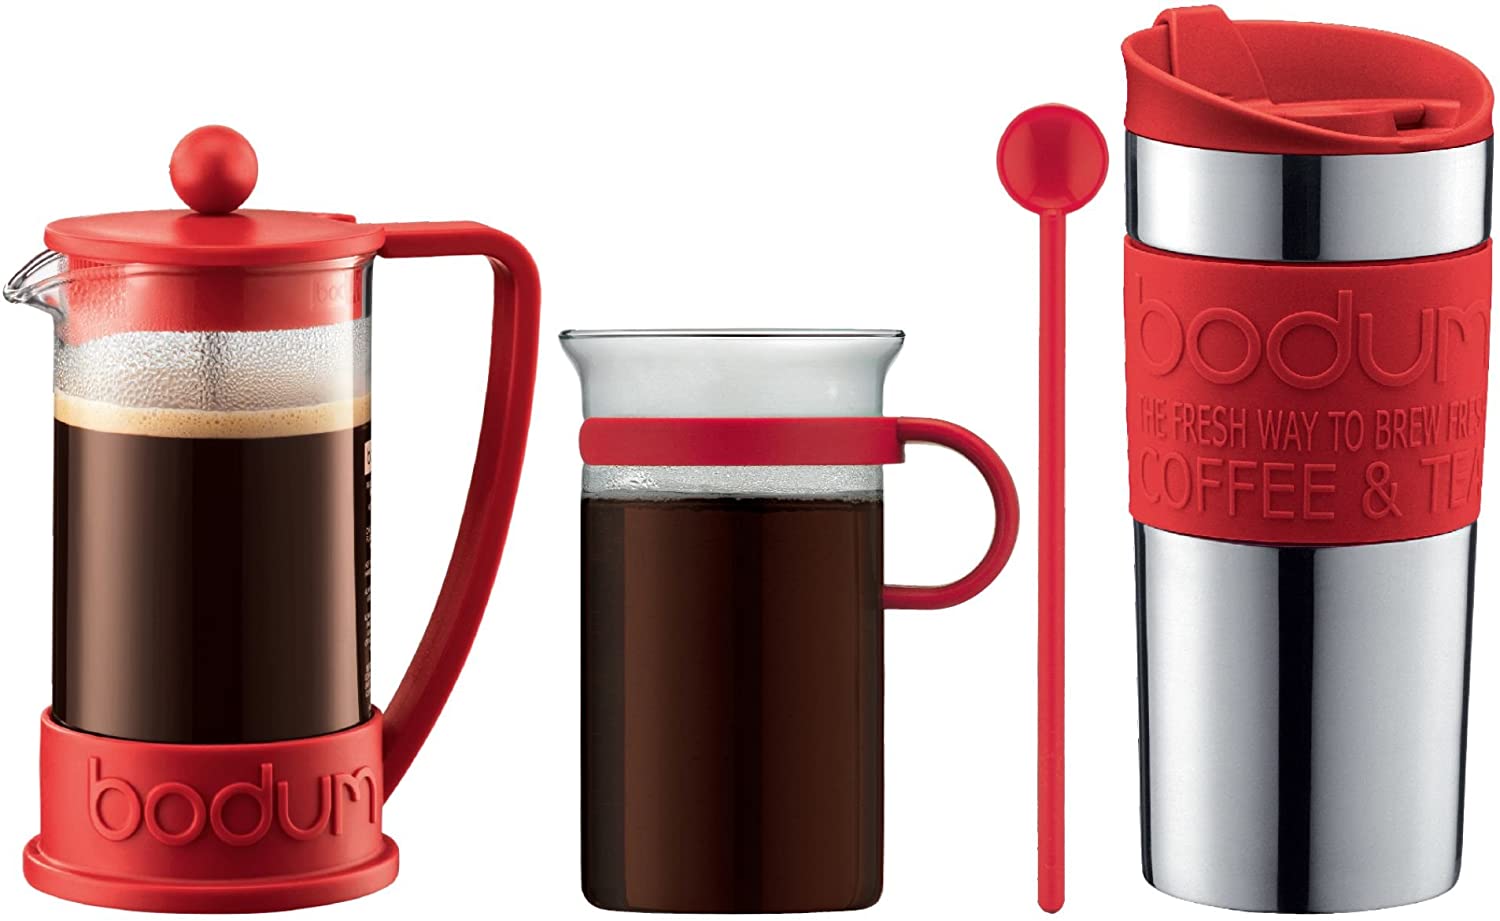 Bodum Coffee Set Red K10948-294 with Matching 3 cup Cafetiere (Brazil Coffee Press), Bodum Vacuum Travel Mug, Large Bistro Nouveau Coffee Glass and Red Bistro Spoon